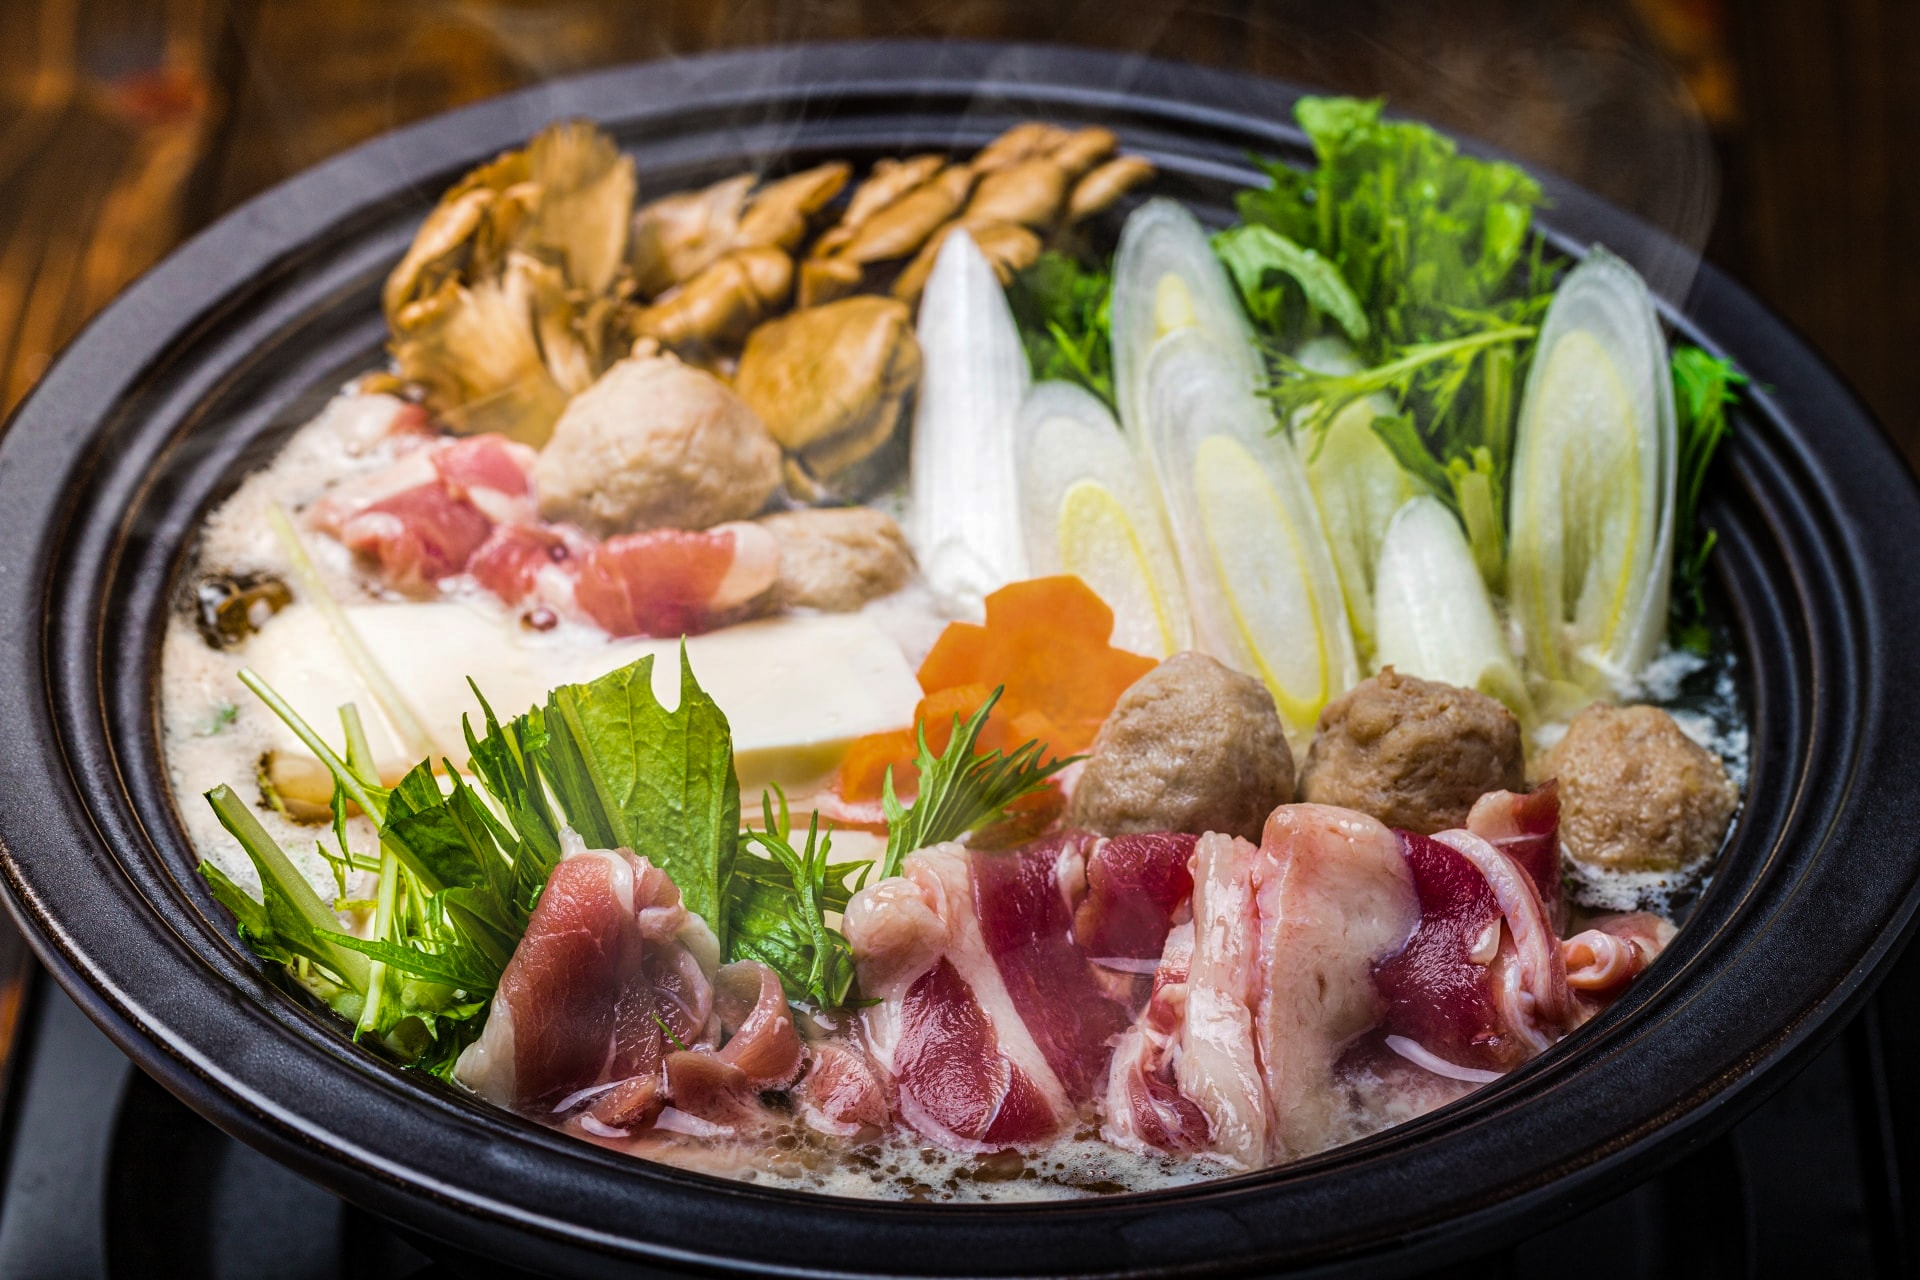 The favorite winter food of japan: Nabe hot-pot dish with vegetables and meat